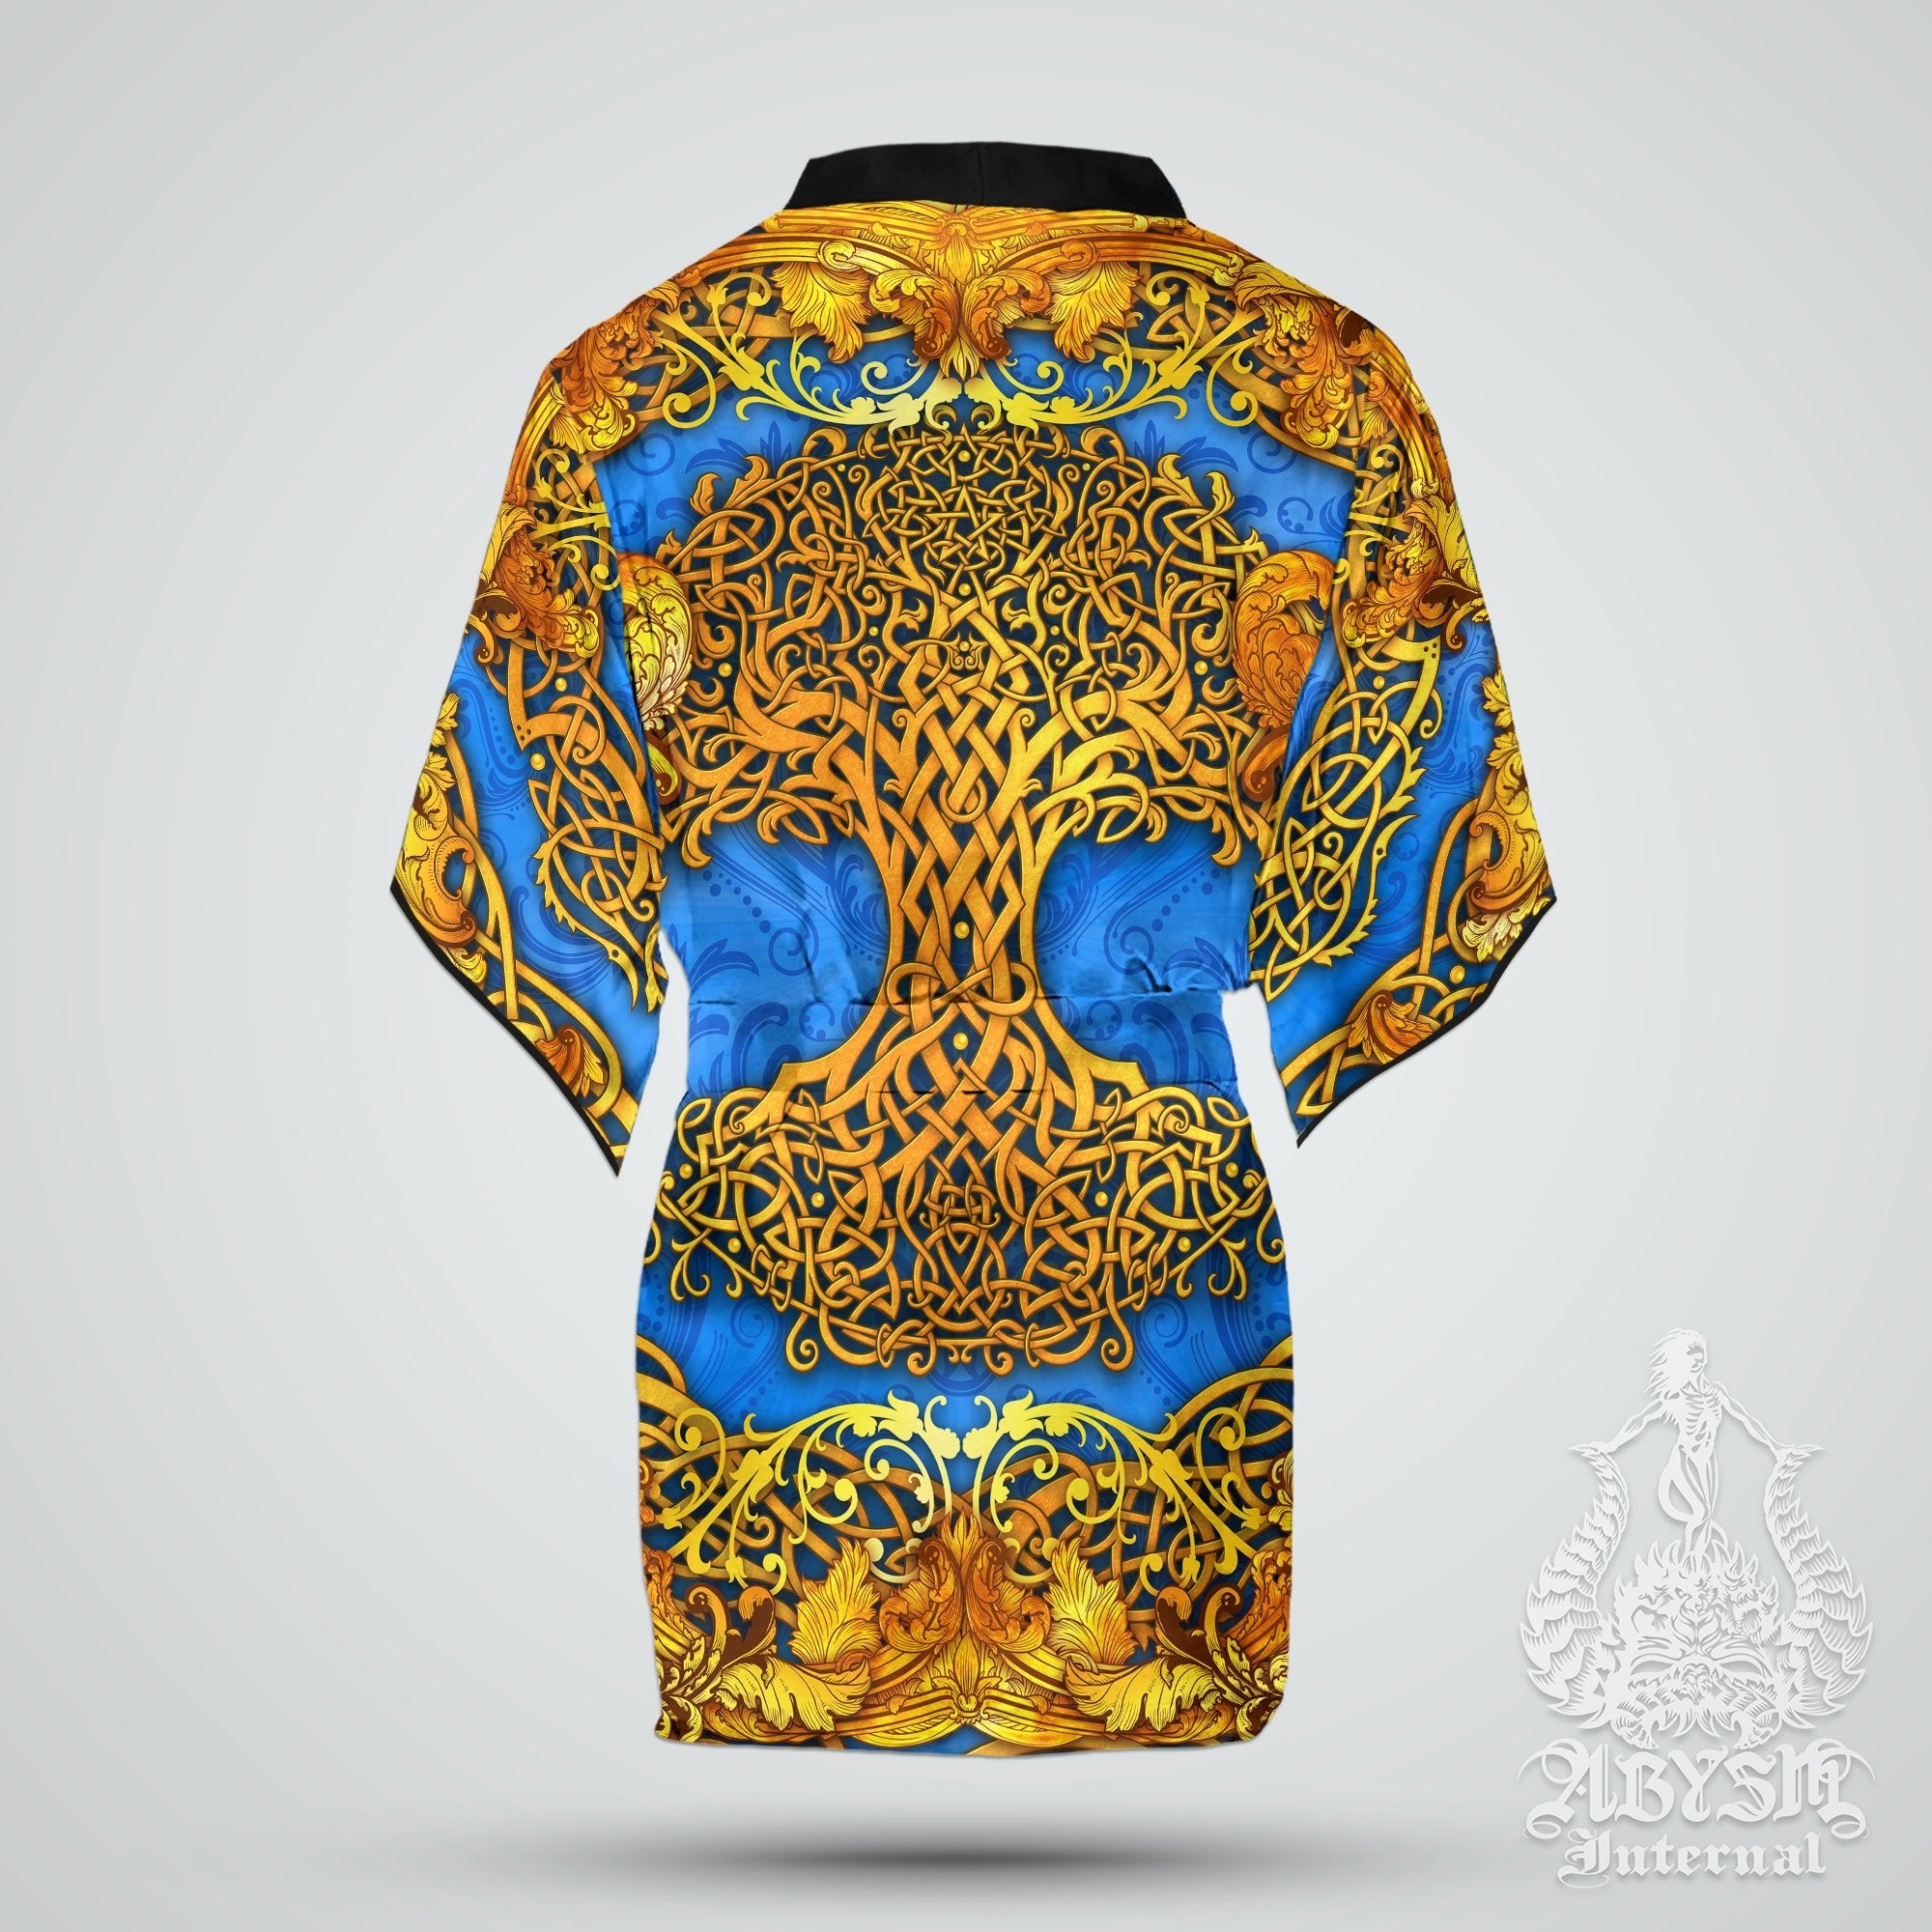 Tree of Life Cover Up, Beach Outfit, Celtic Party Kimono, Wicca Summer Festival Robe, Witchy Indie and Alternative Clothing, Unisex - Cyan Gold - Abysm Internal